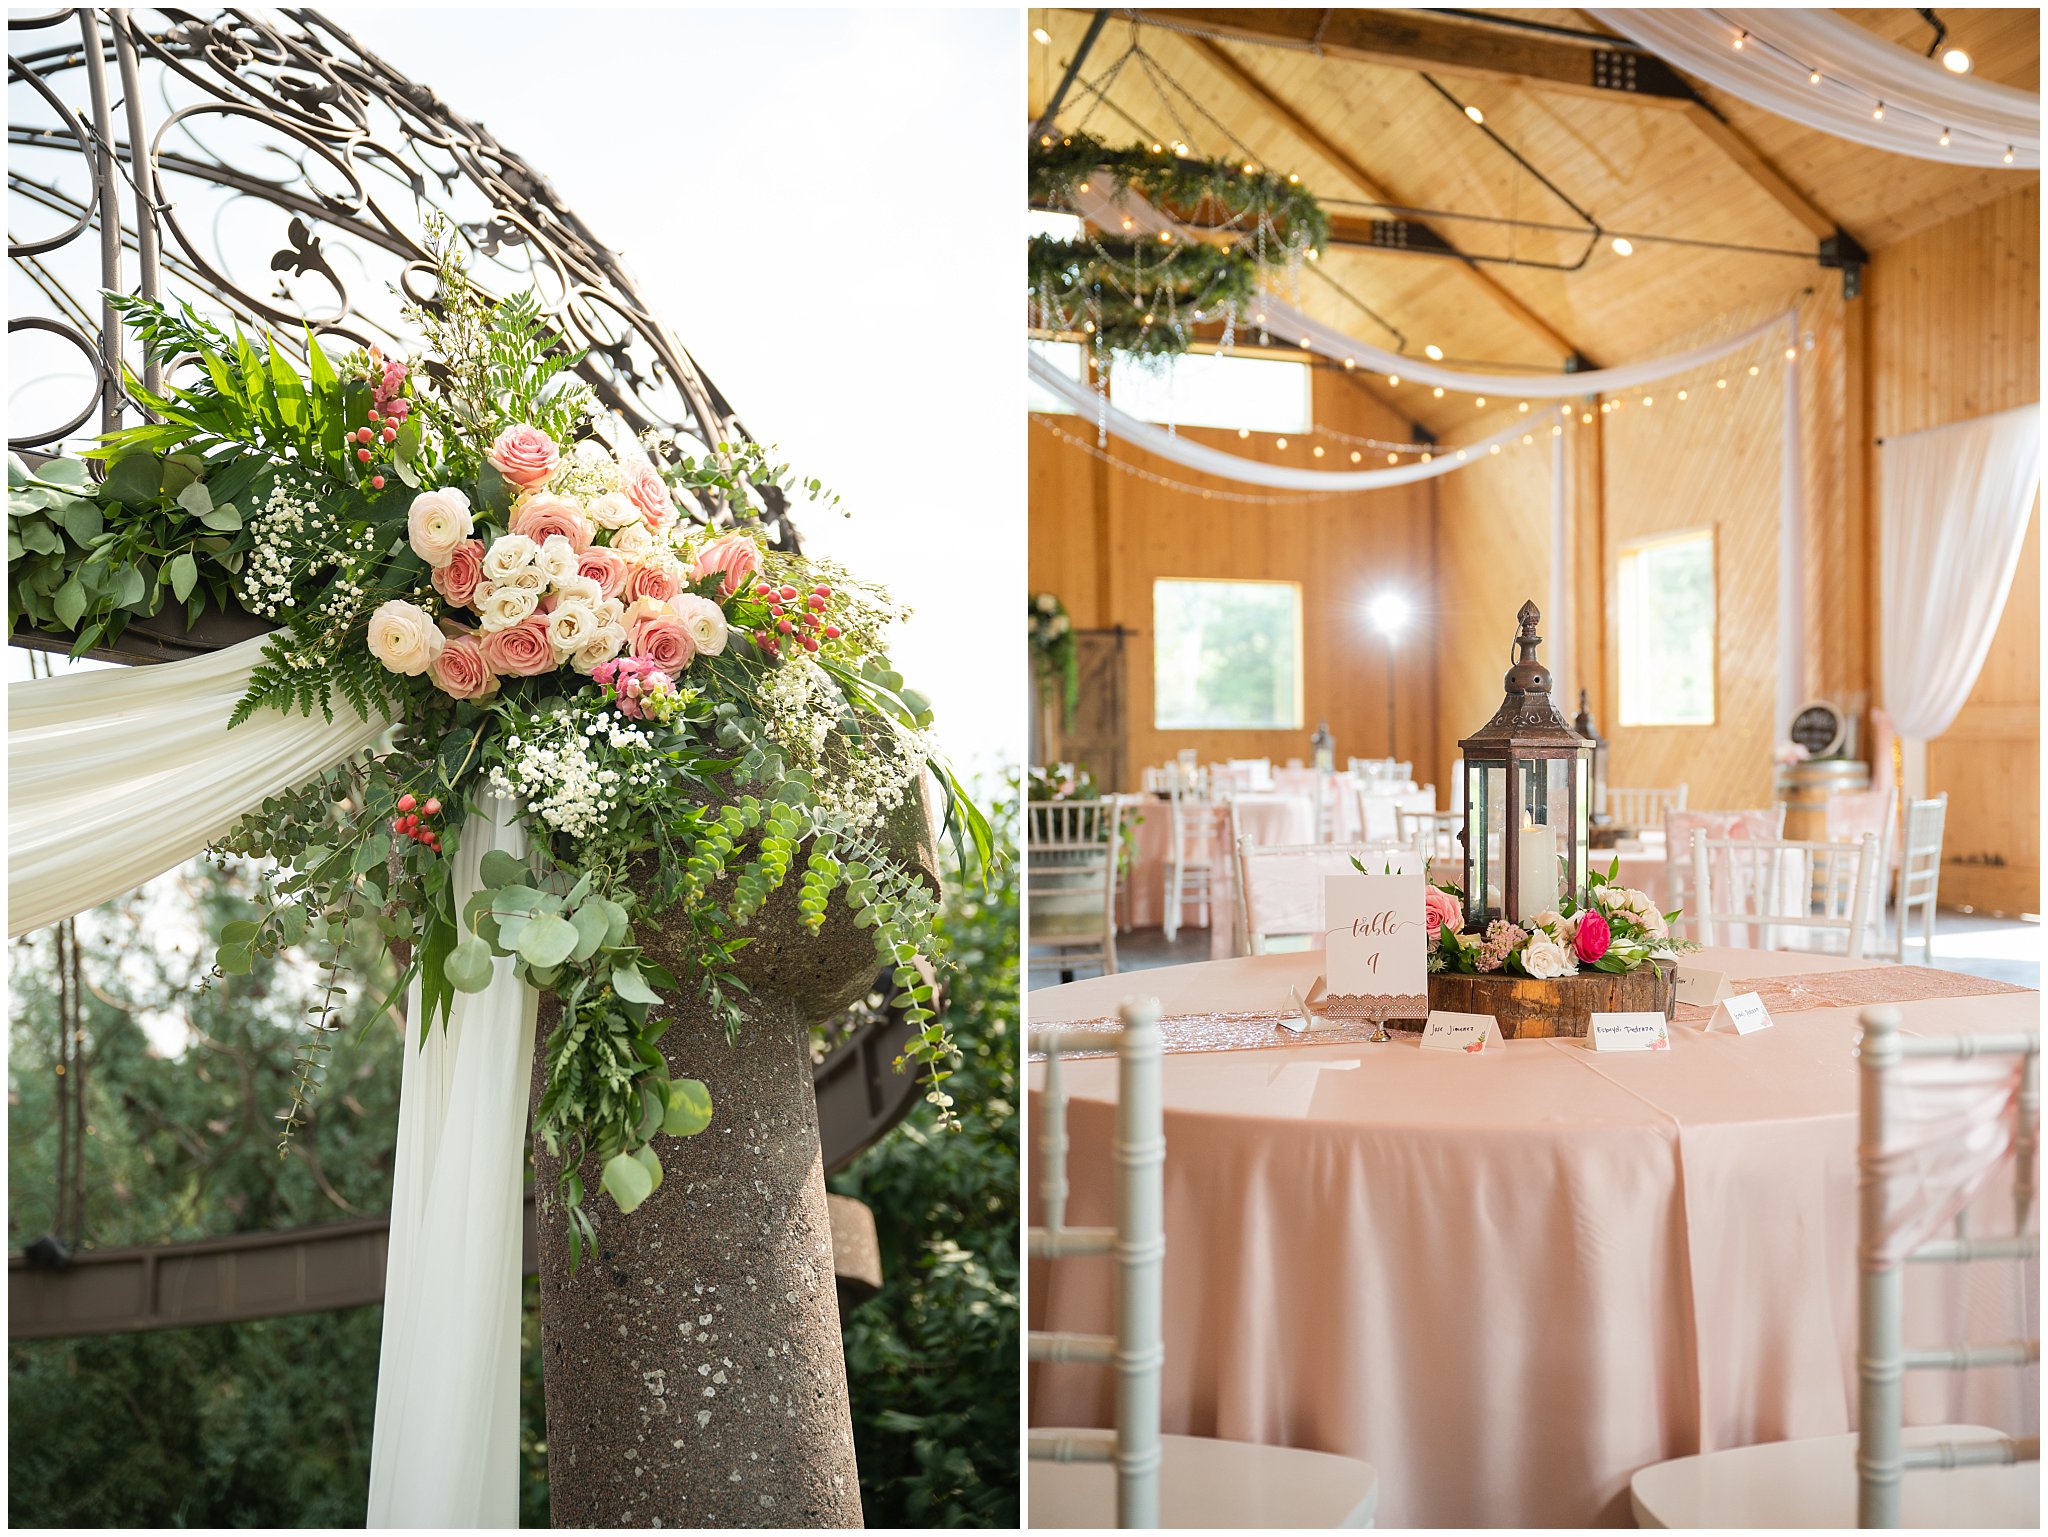 Ceremony arch piece with pink florals and reception tables in a barn with lanterns | Rustic Mountain Destination Wedding at Oak Hills Utah | Jessie and Dallin Photography